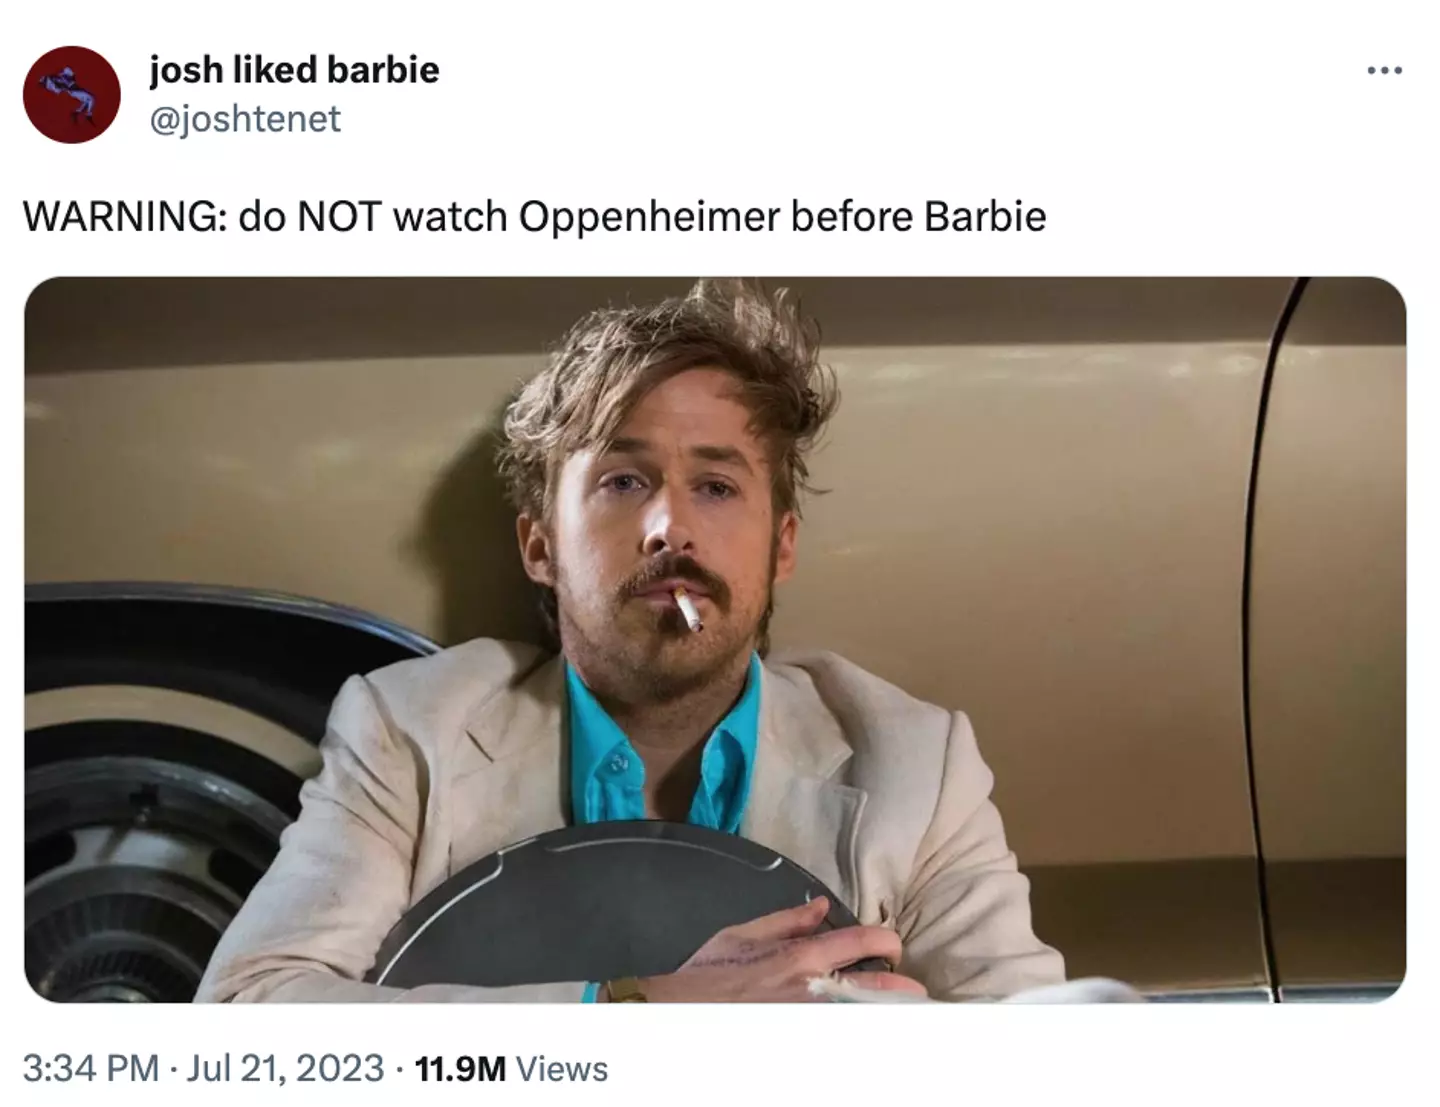 Cinemagoers warned others not to watch Oppenheimer before Barbie.